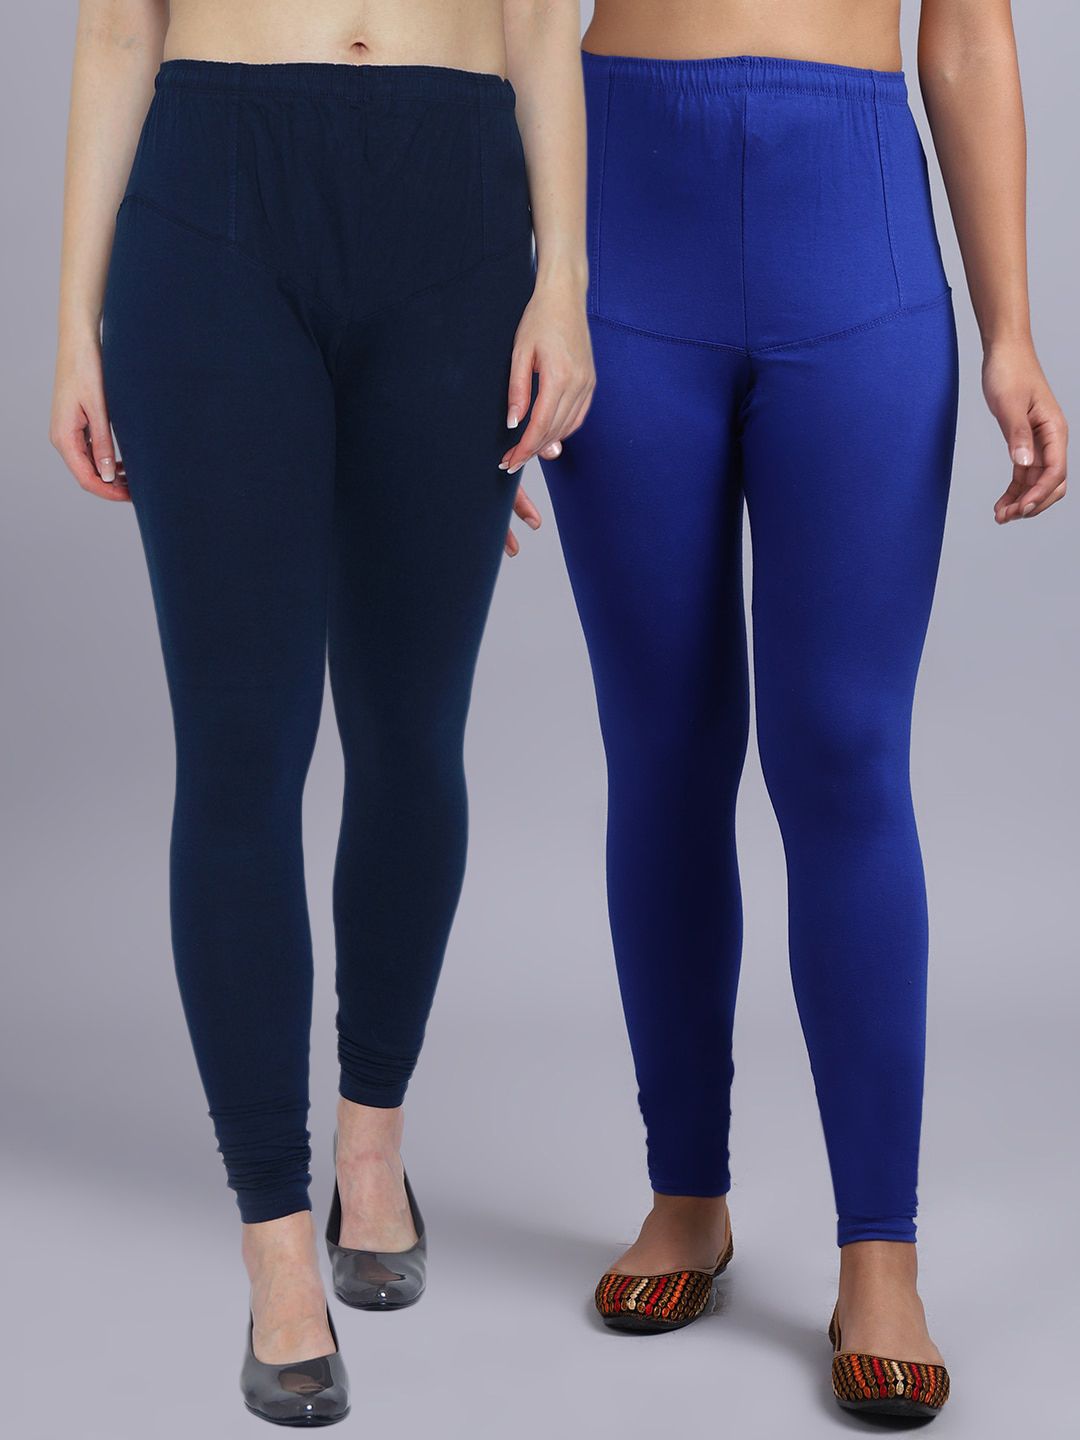 Jinfo Women Pack Of 2 Blue and Navy Blue Solid Leggings Price in India